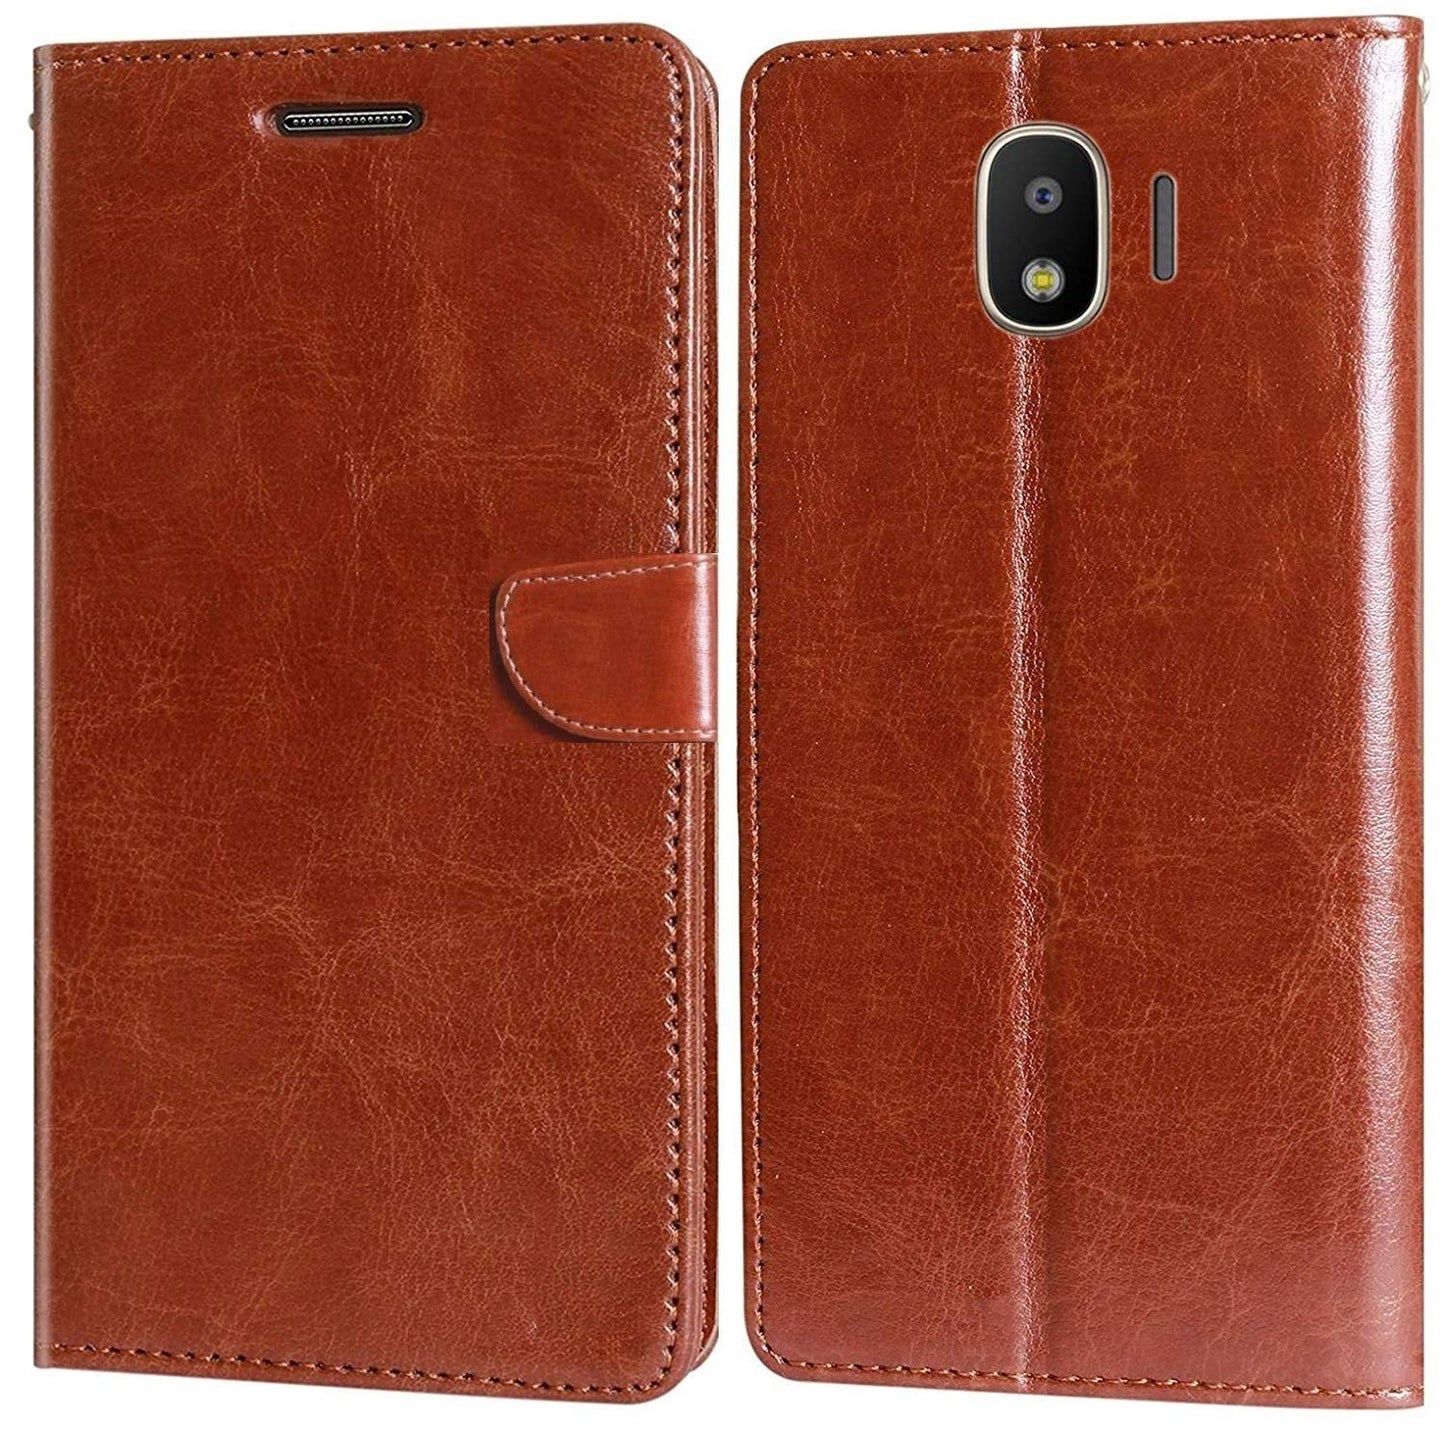 Samsung Galaxy J2 Core Leather Cover Flip